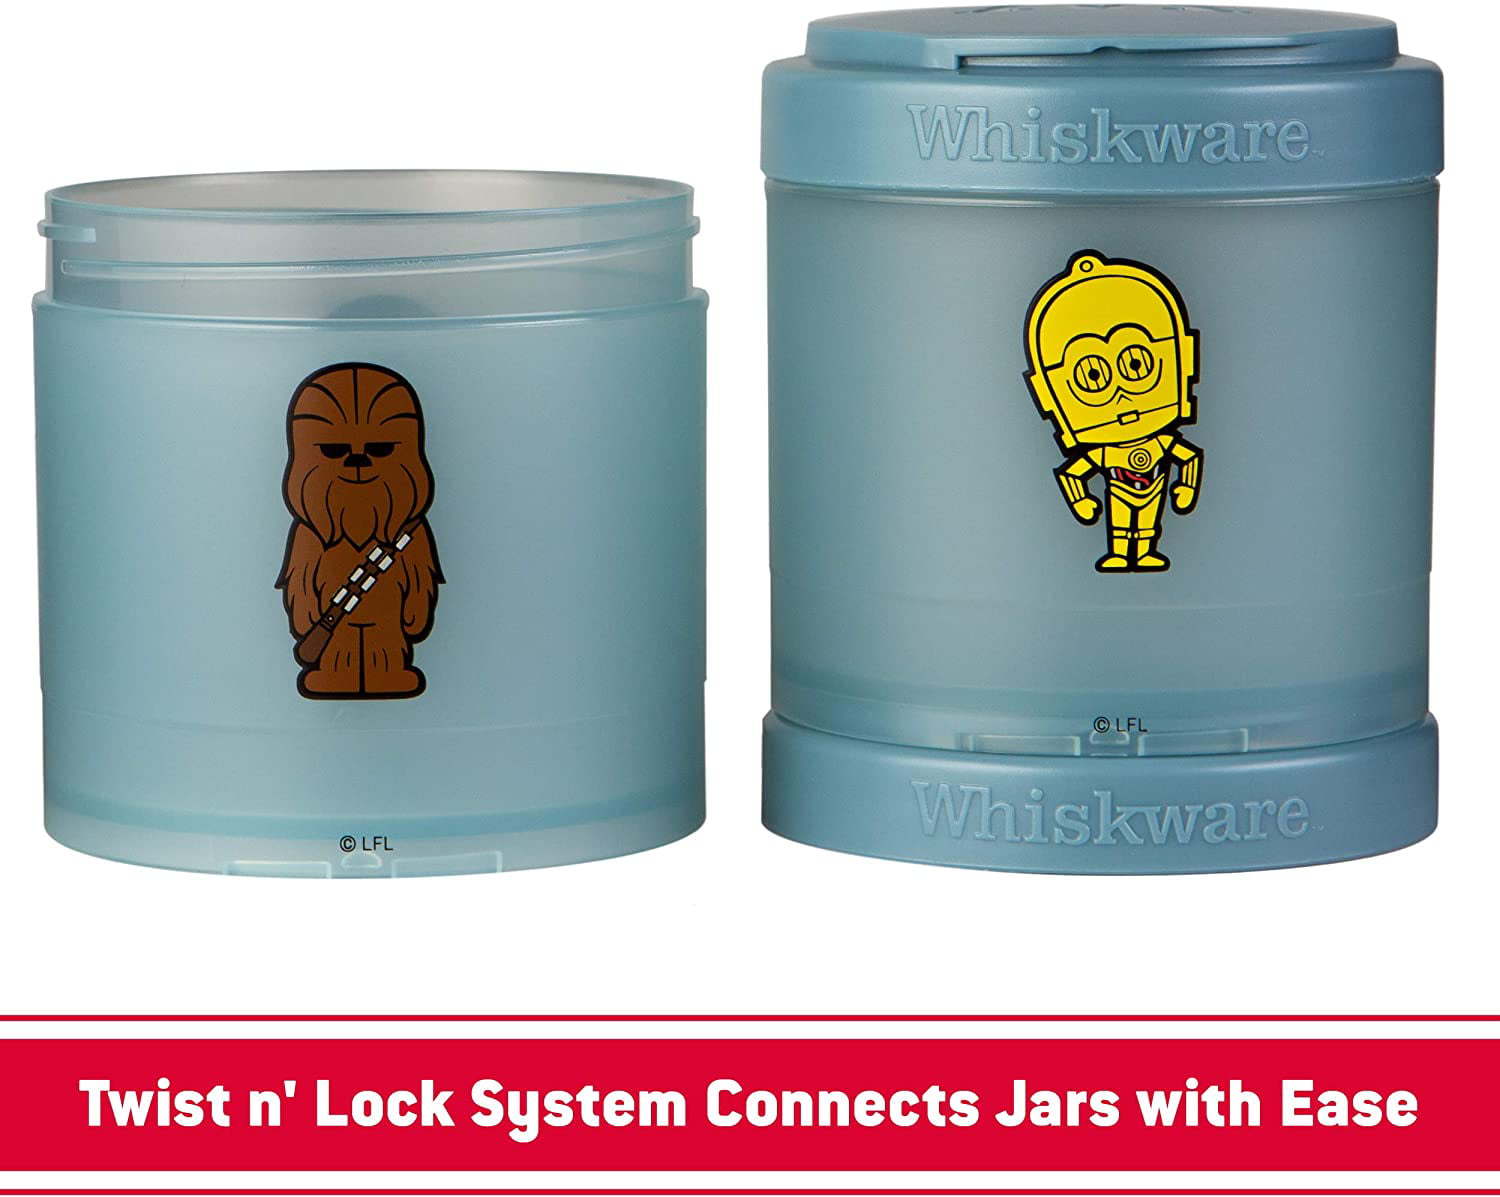 Whiskware Star Wars Stackable Snack Pack Containers - Mando & The Child